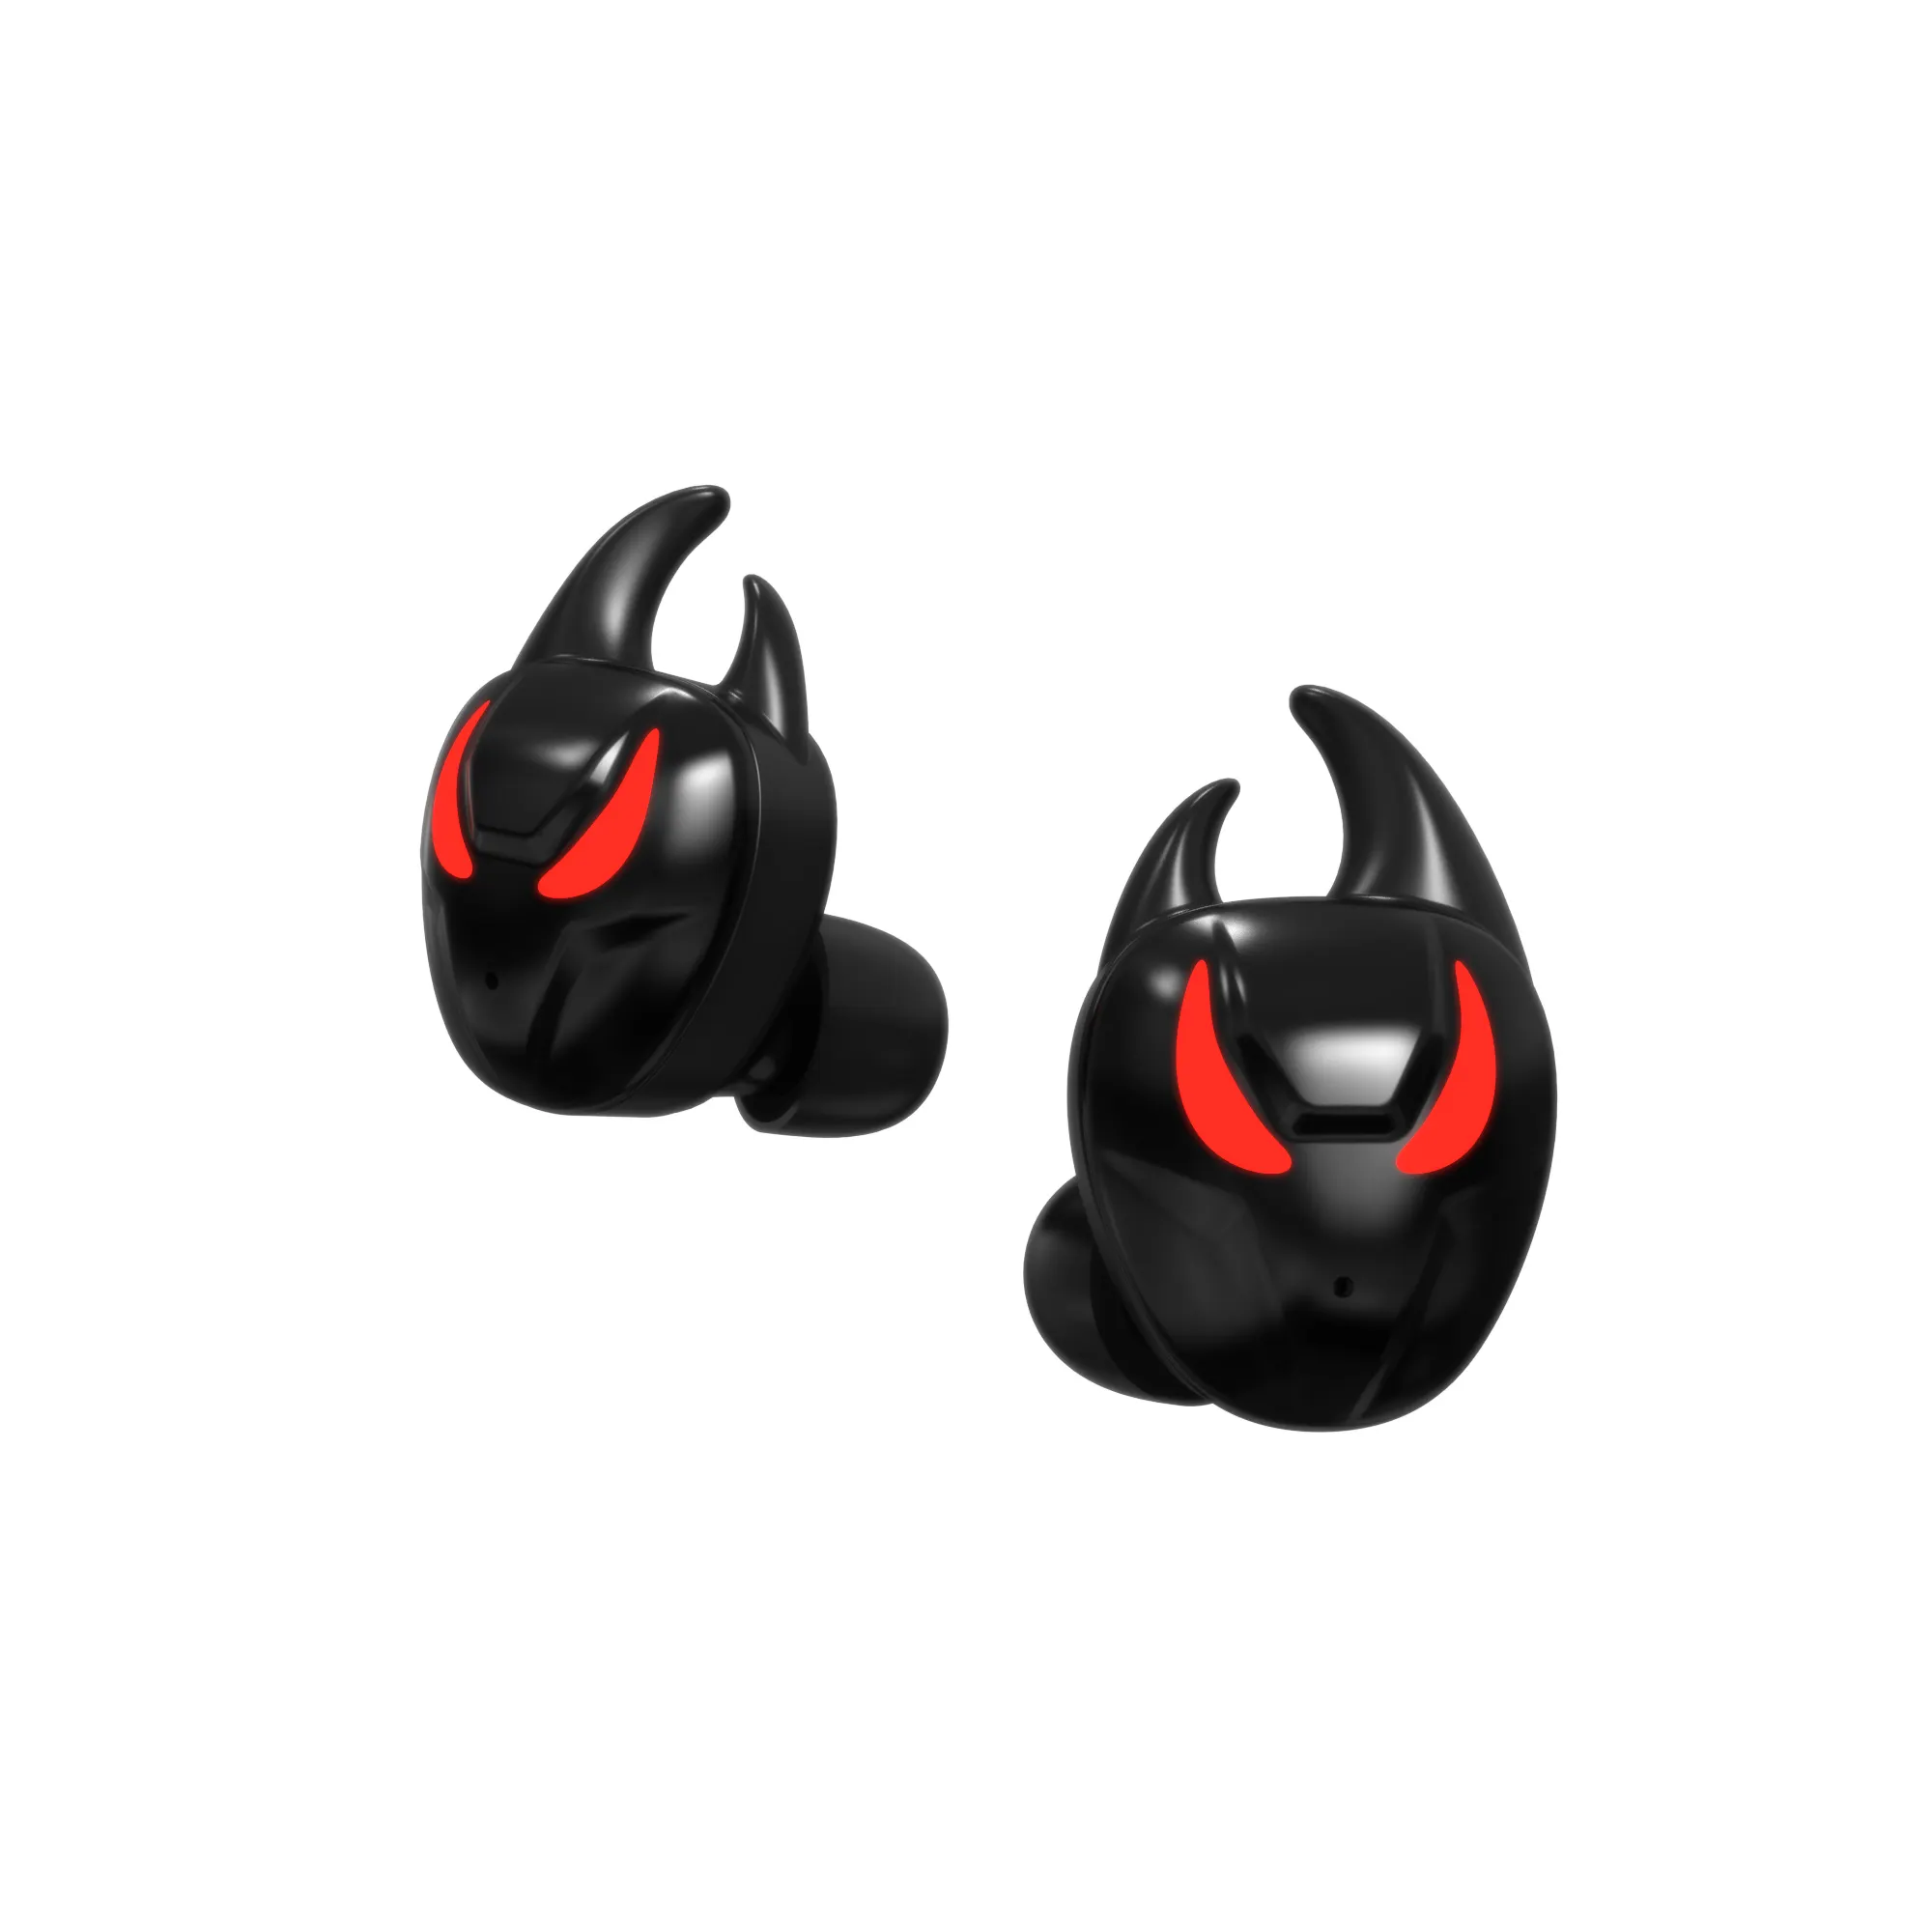 KINGSTAR Mini Earbuds Bluetooth 5.0 Headset gaming TWS Wireless Earphones with led light